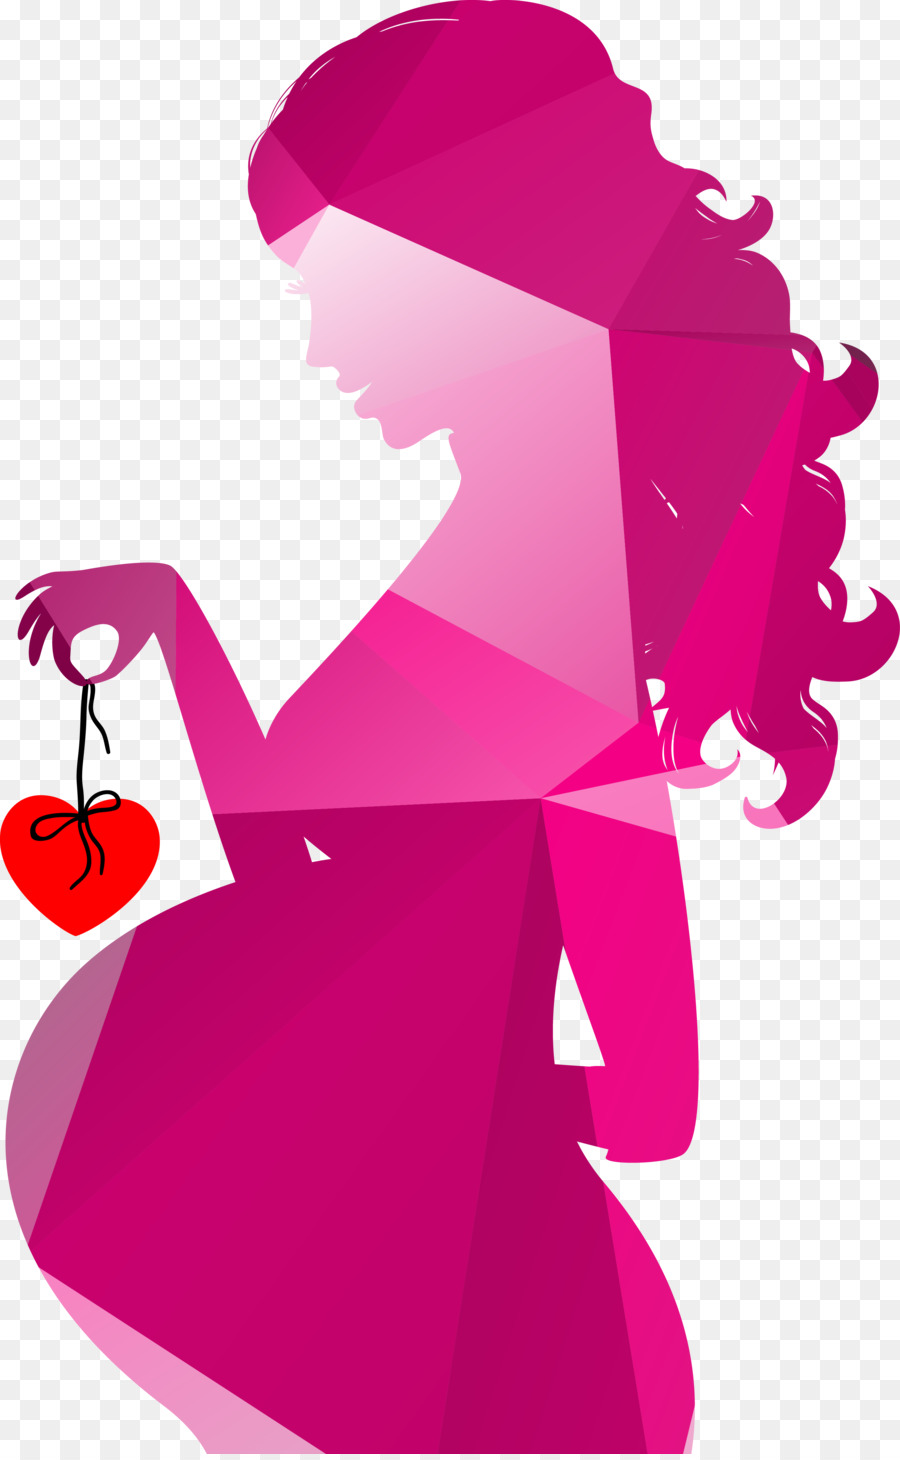 Silhouette Pregnancy Royalty-free Clip art - Colorful geometric pregnant women png download - 2792*4512 - Free Transparent Silhouette png Download.